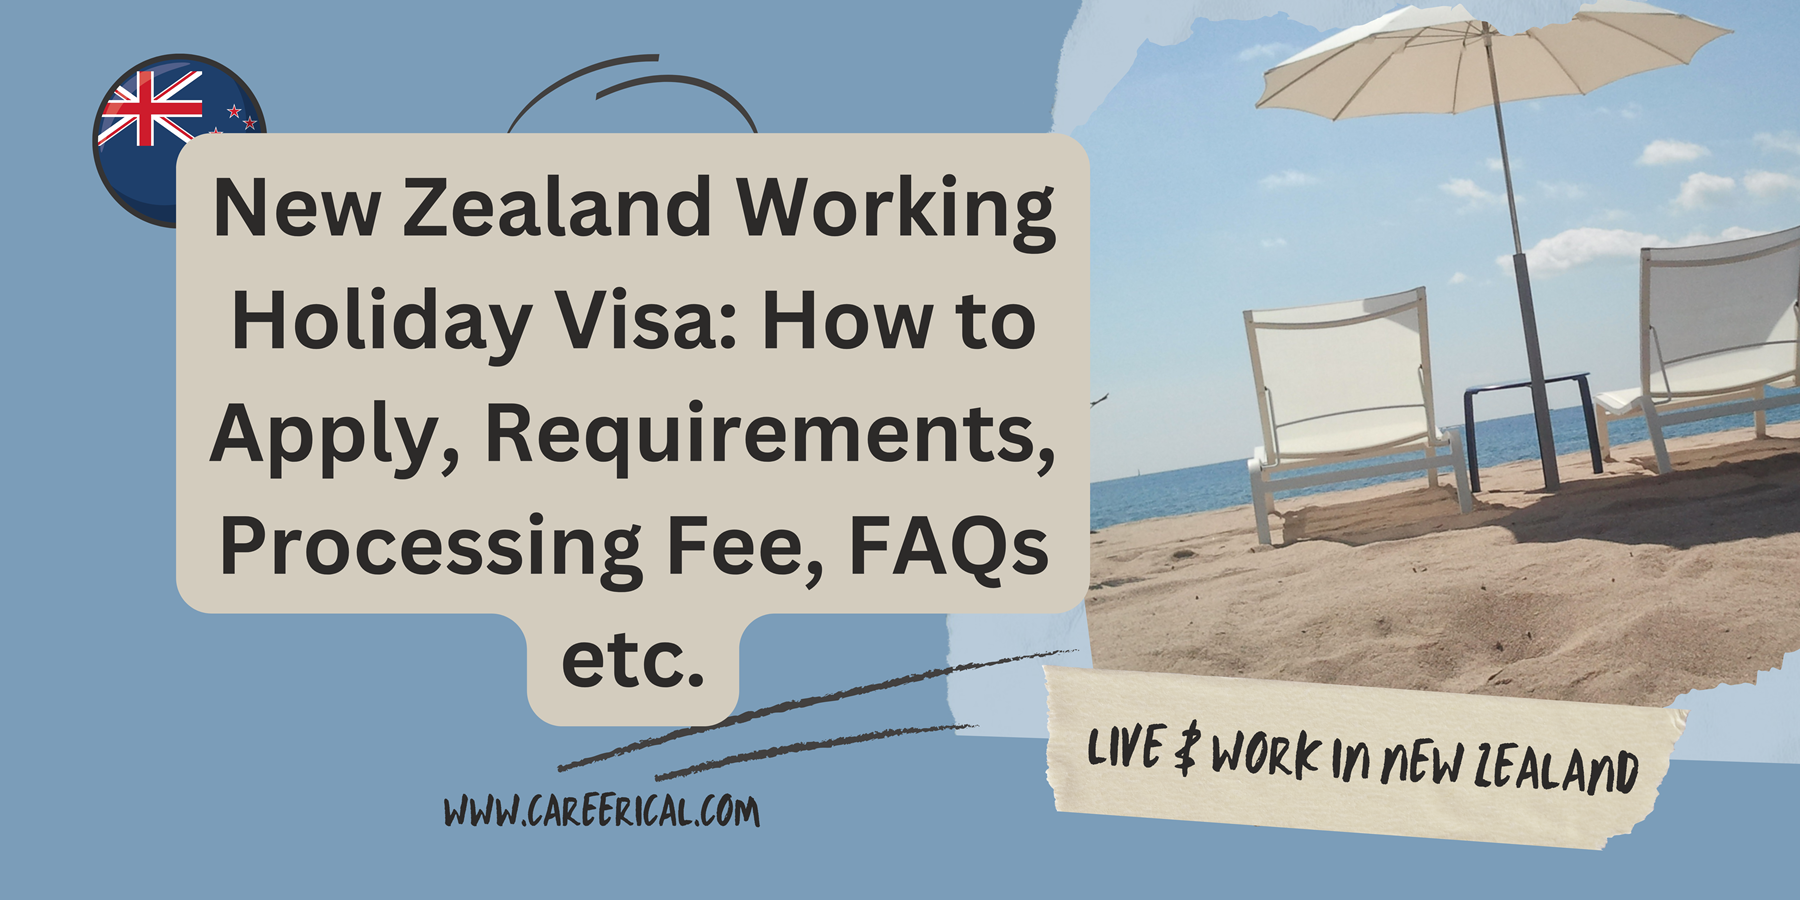 New Zealand Working Holiday Visa How to Apply, Requirements, Processing Fee, FAQs etc.